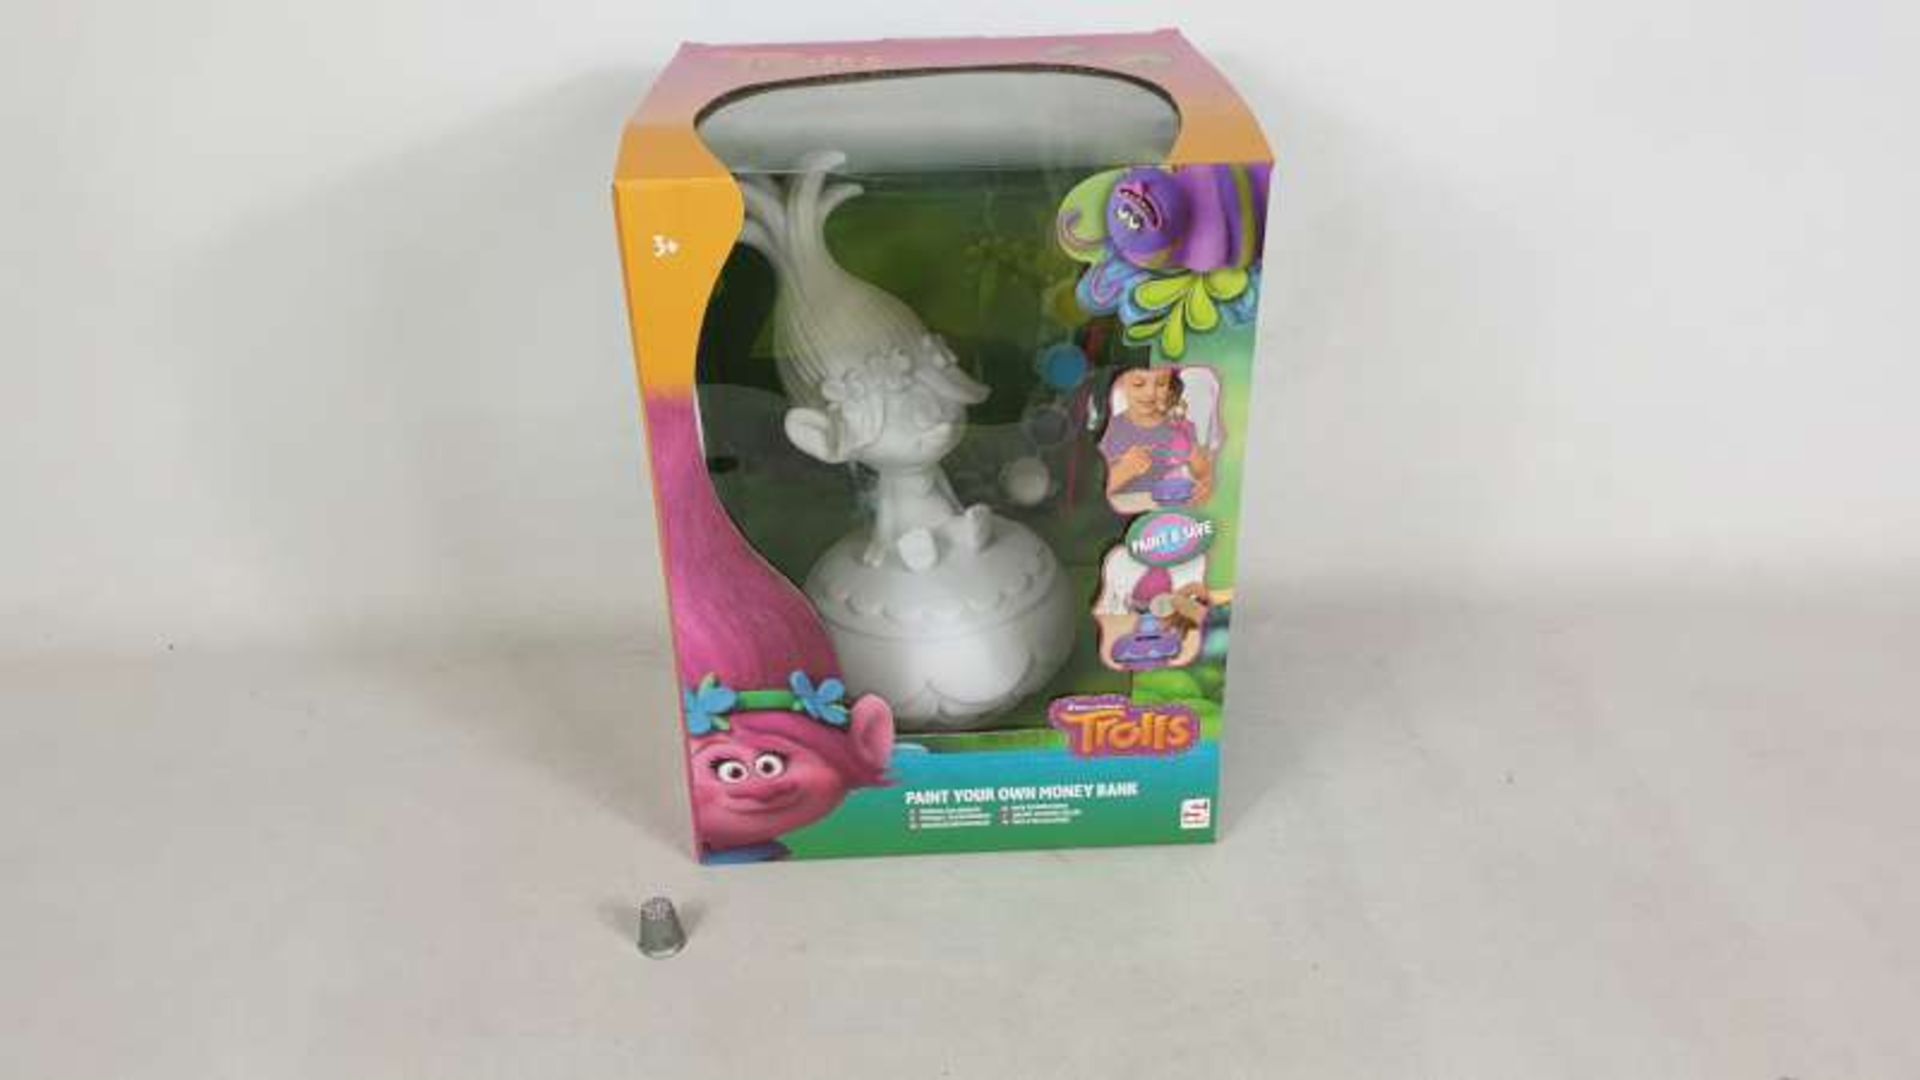 30 X BRAND NEW BOXED DREAMWORKS TROLLS PAINT YOUR OWN MONEY BANKS IN 15 BOXES